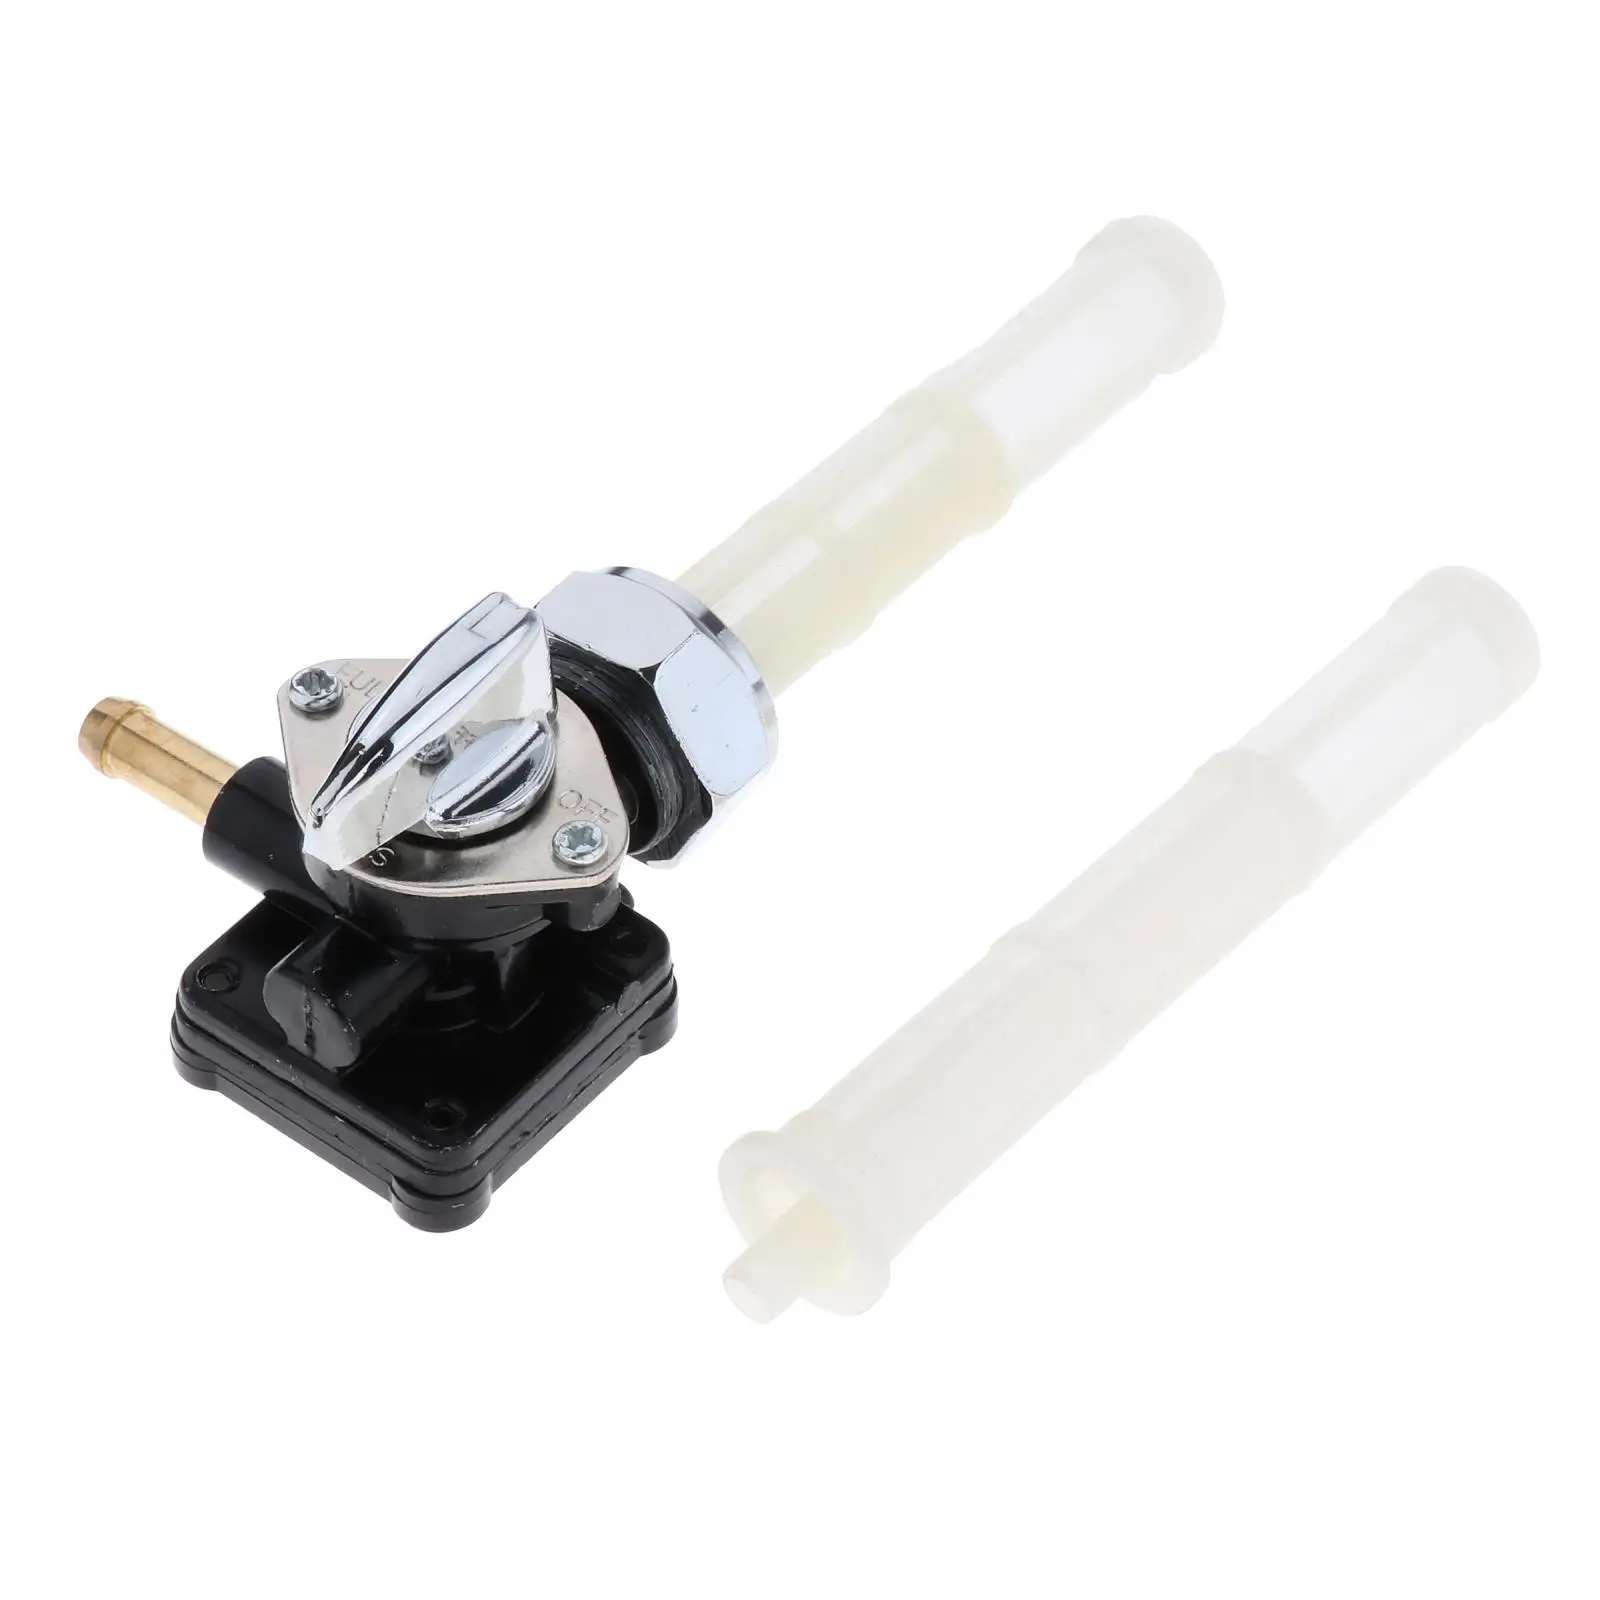 Motorcycle Fuel Valve Petcock 61338-94D for Flst Fxst Assembly Parts